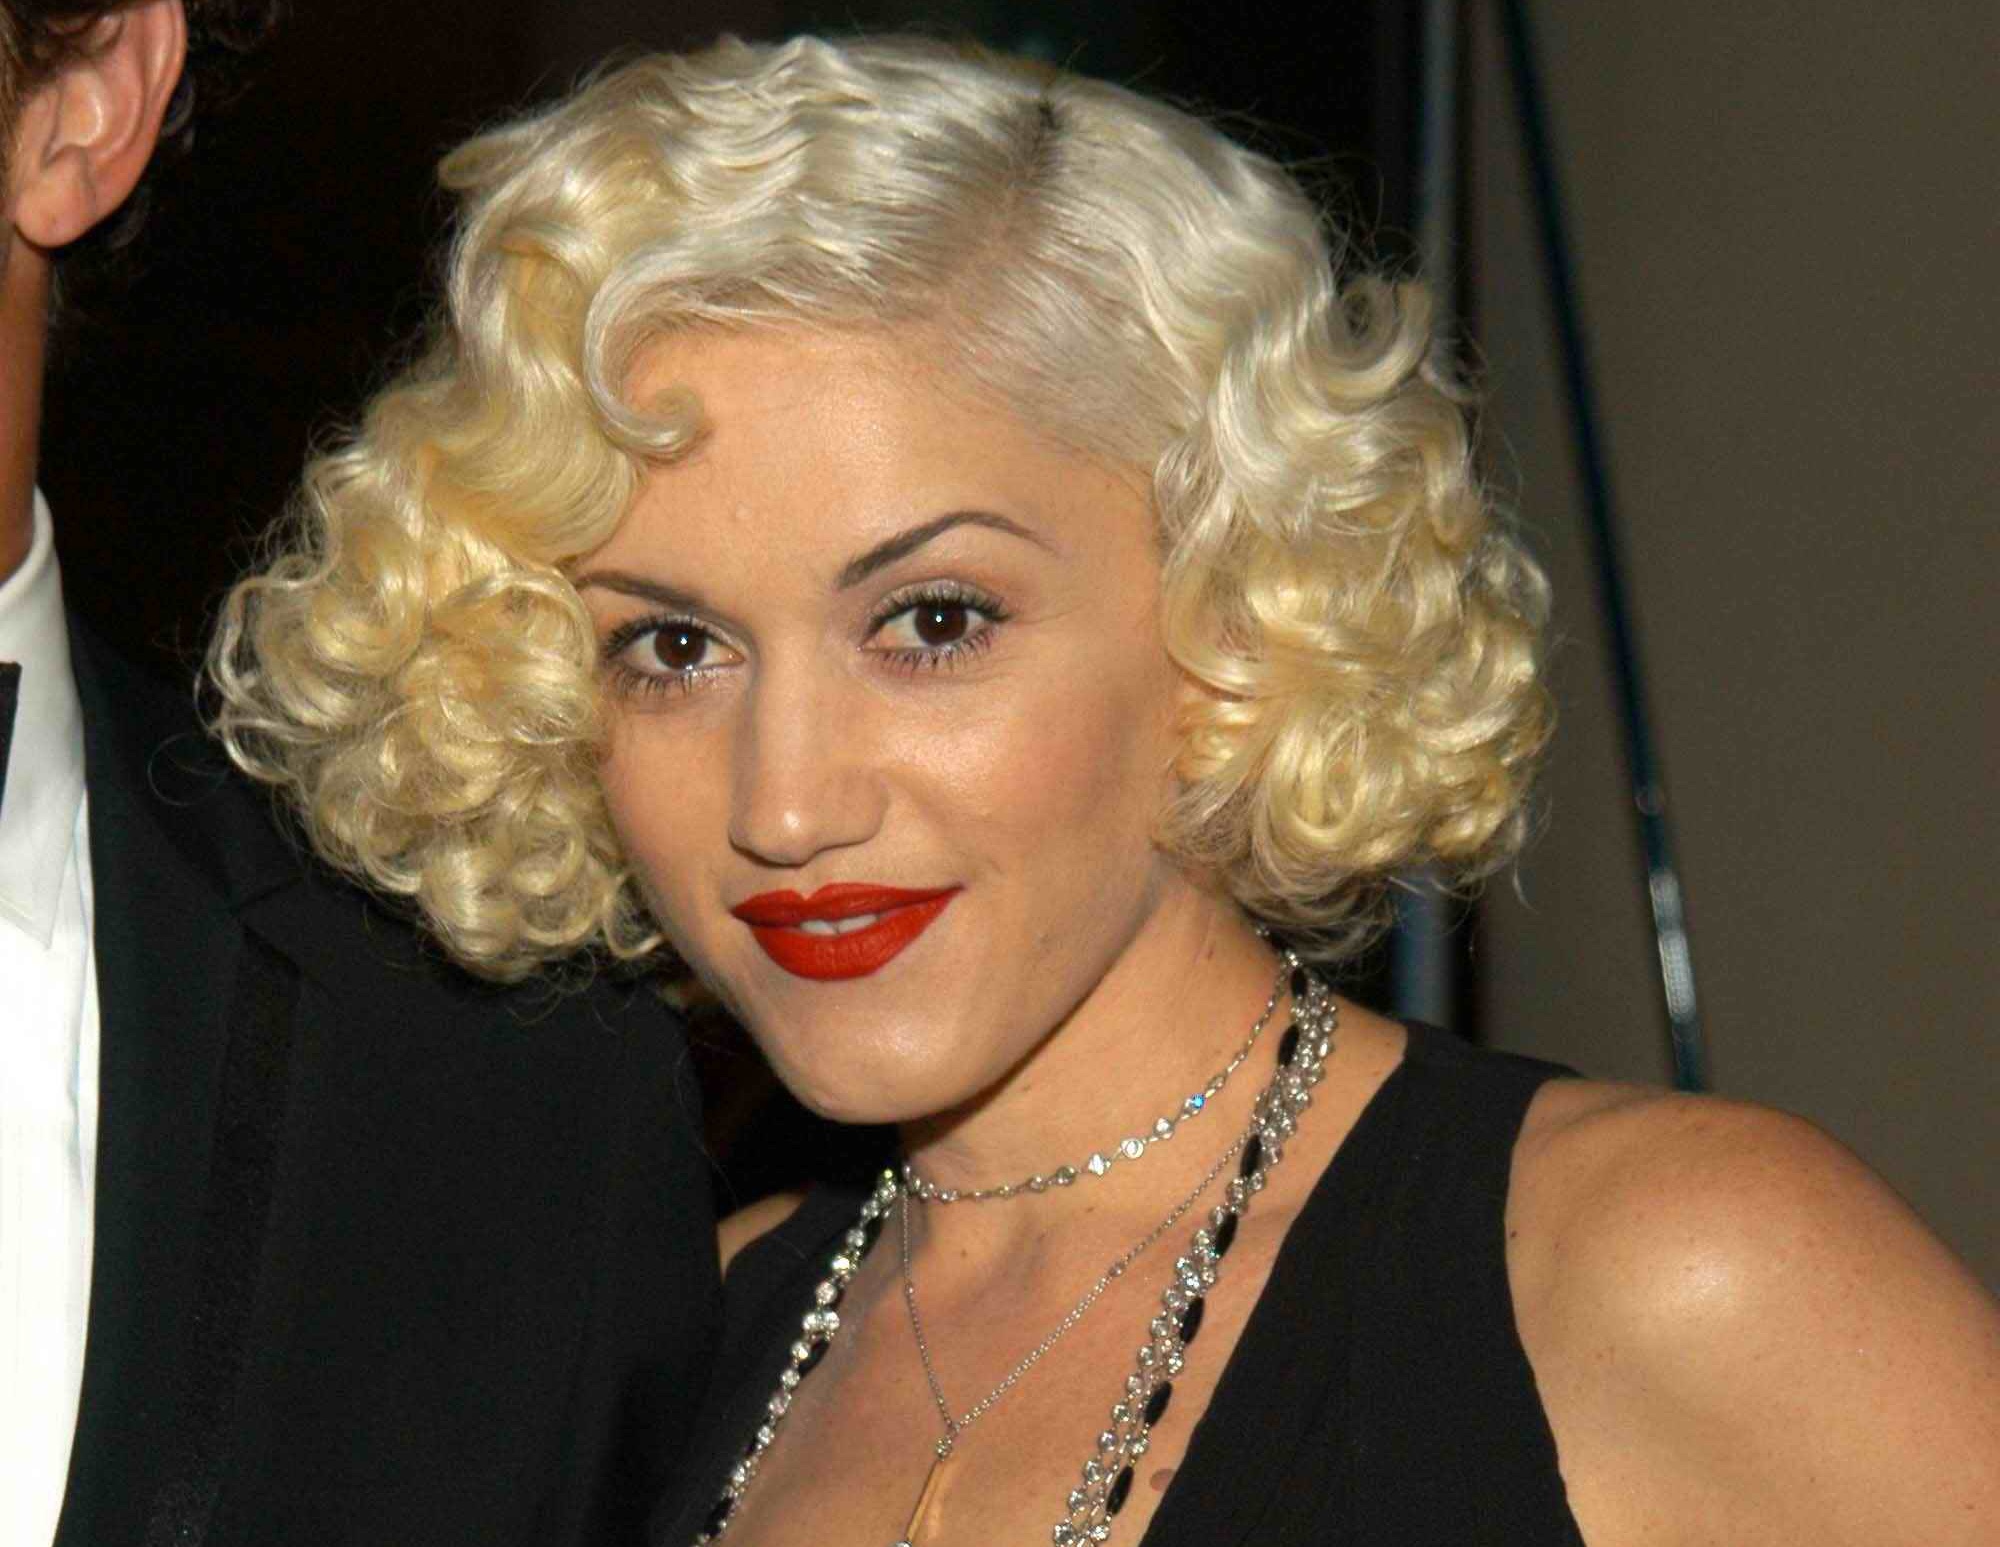  Gwen Stefani used to work as a waitress